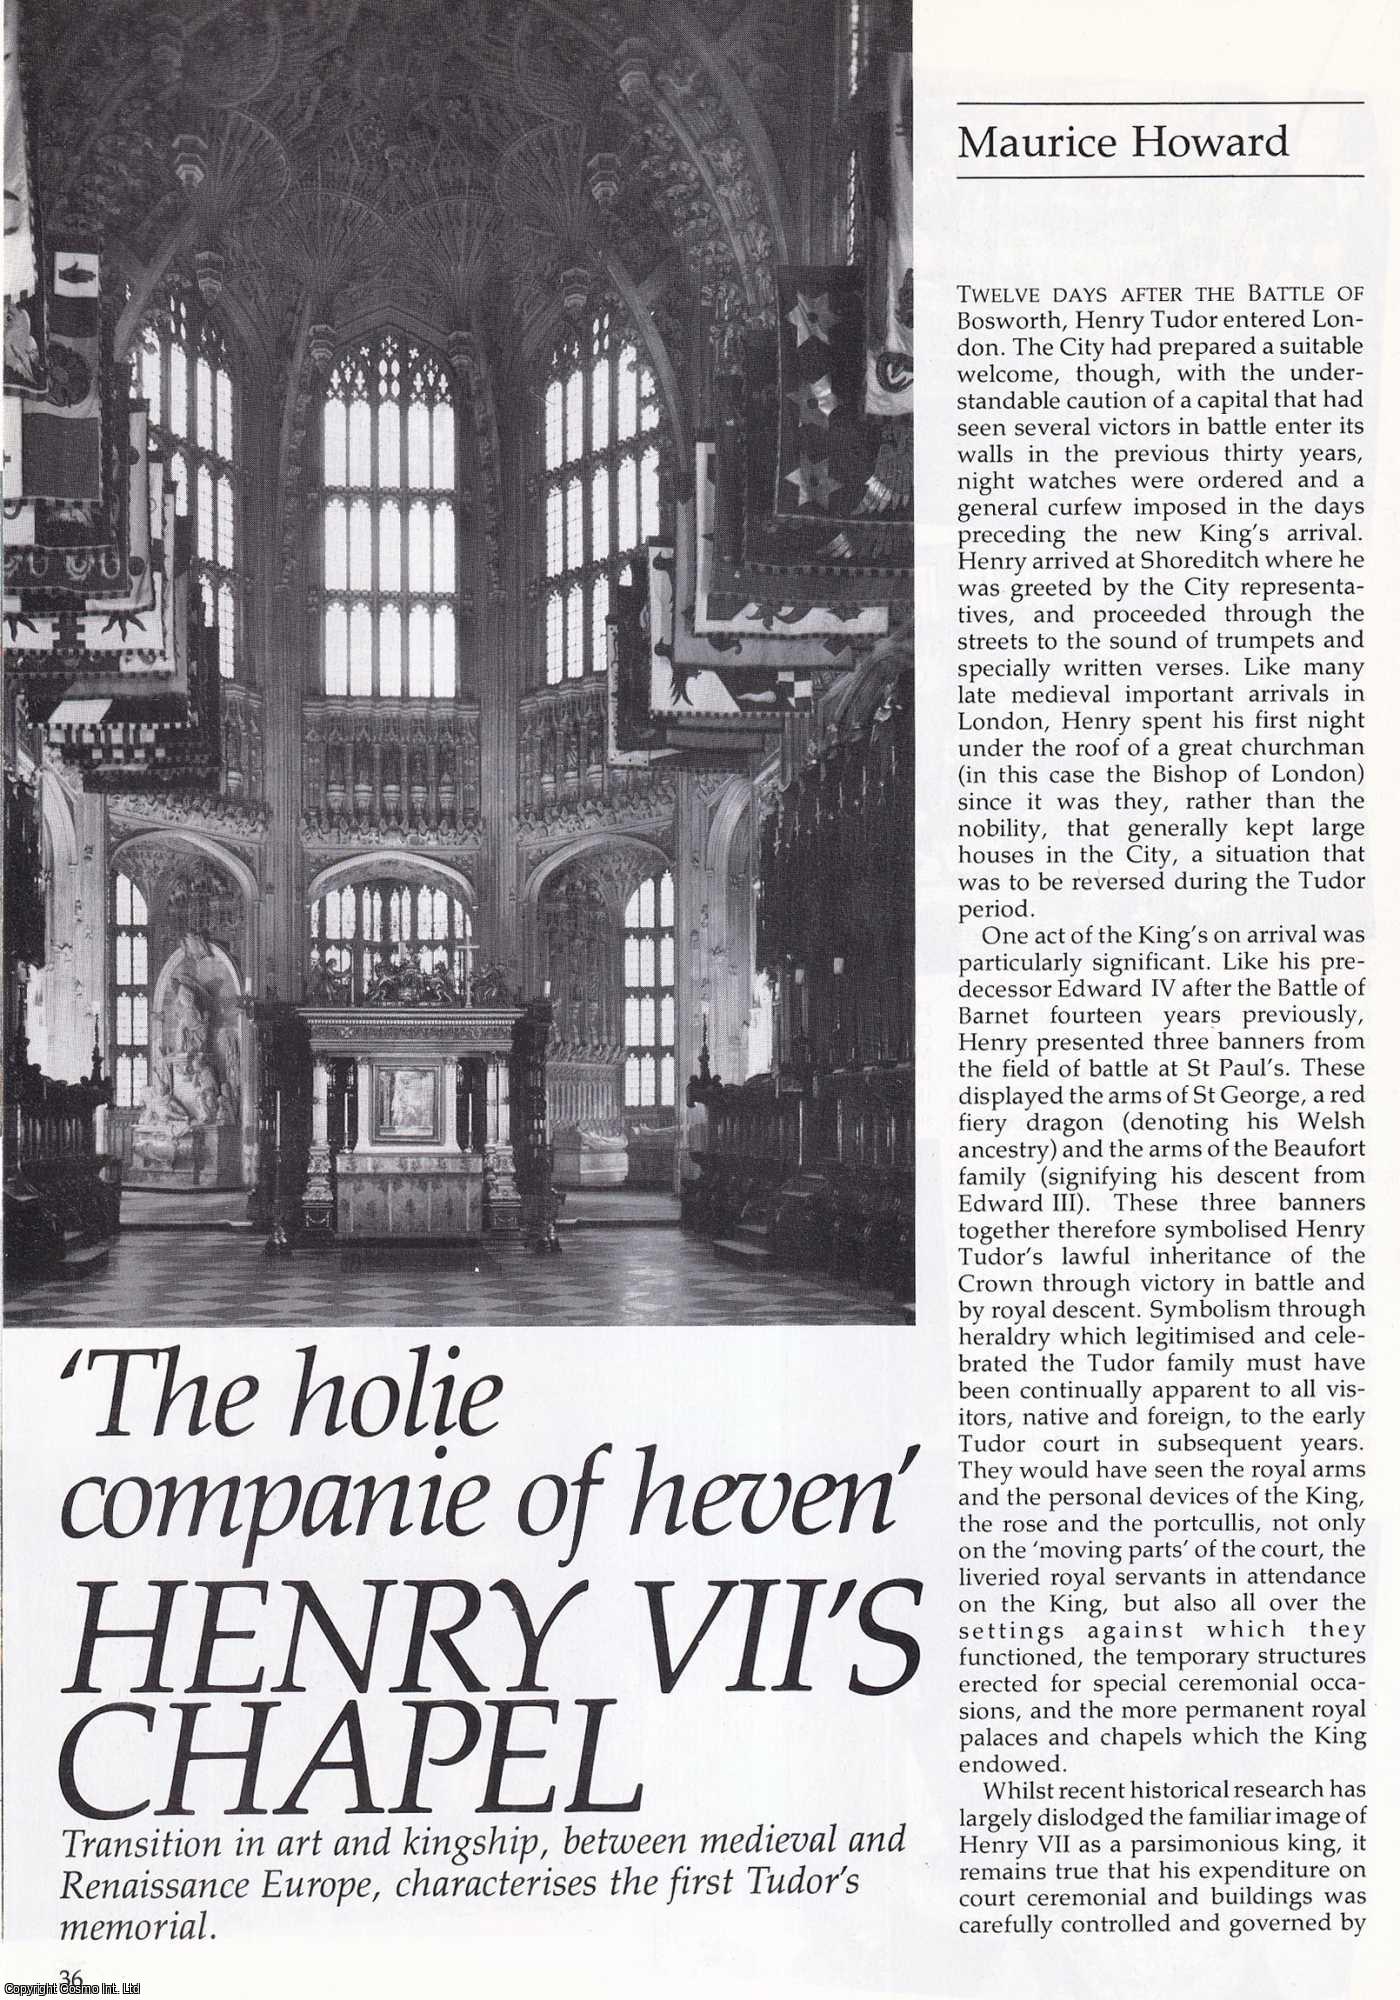 Maurice Howard - The holie companie of heven': Henry VII's Chapel. An original article from History Today, 1986.